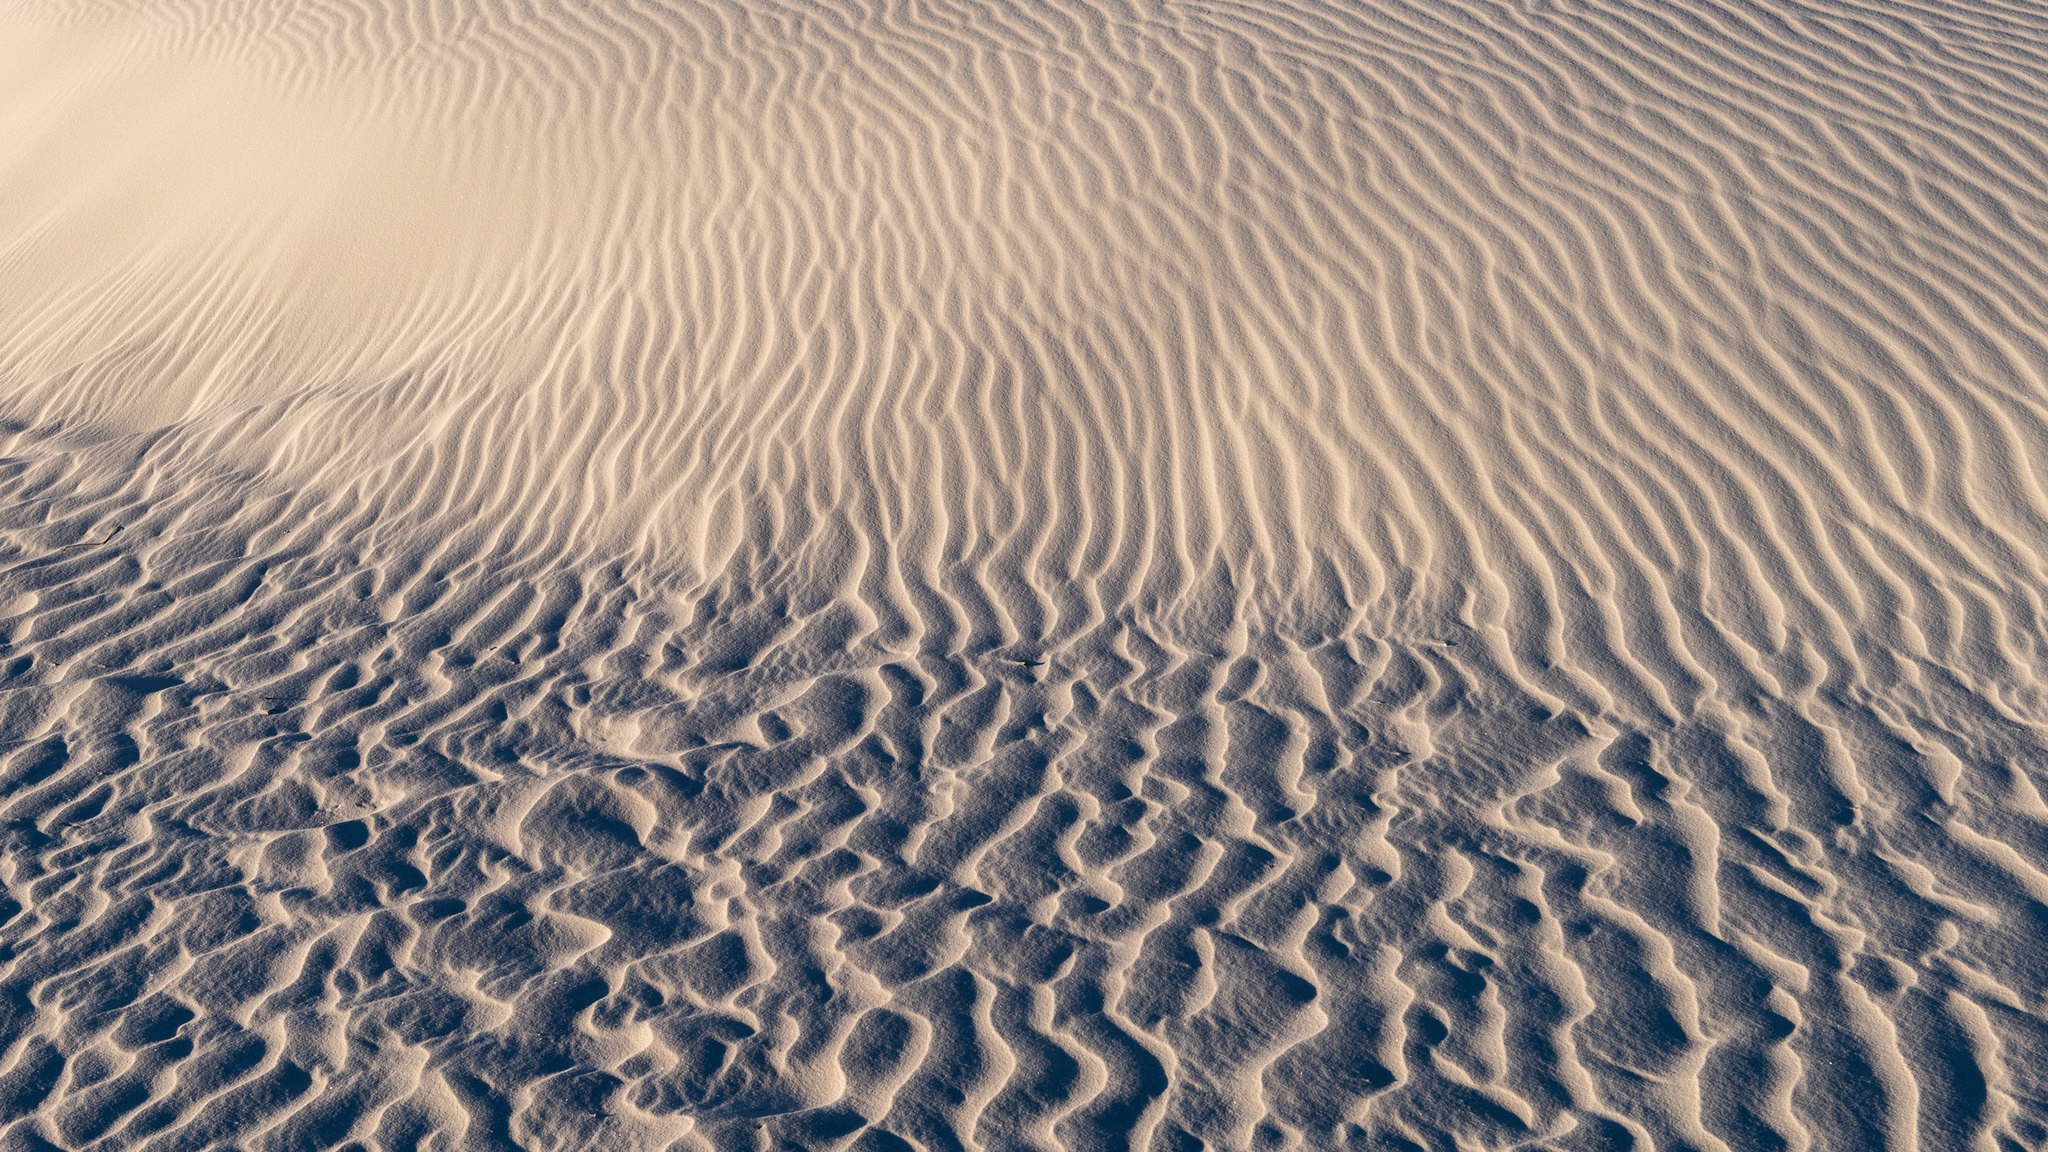 General 2048x1152 outdoors nature sand texture